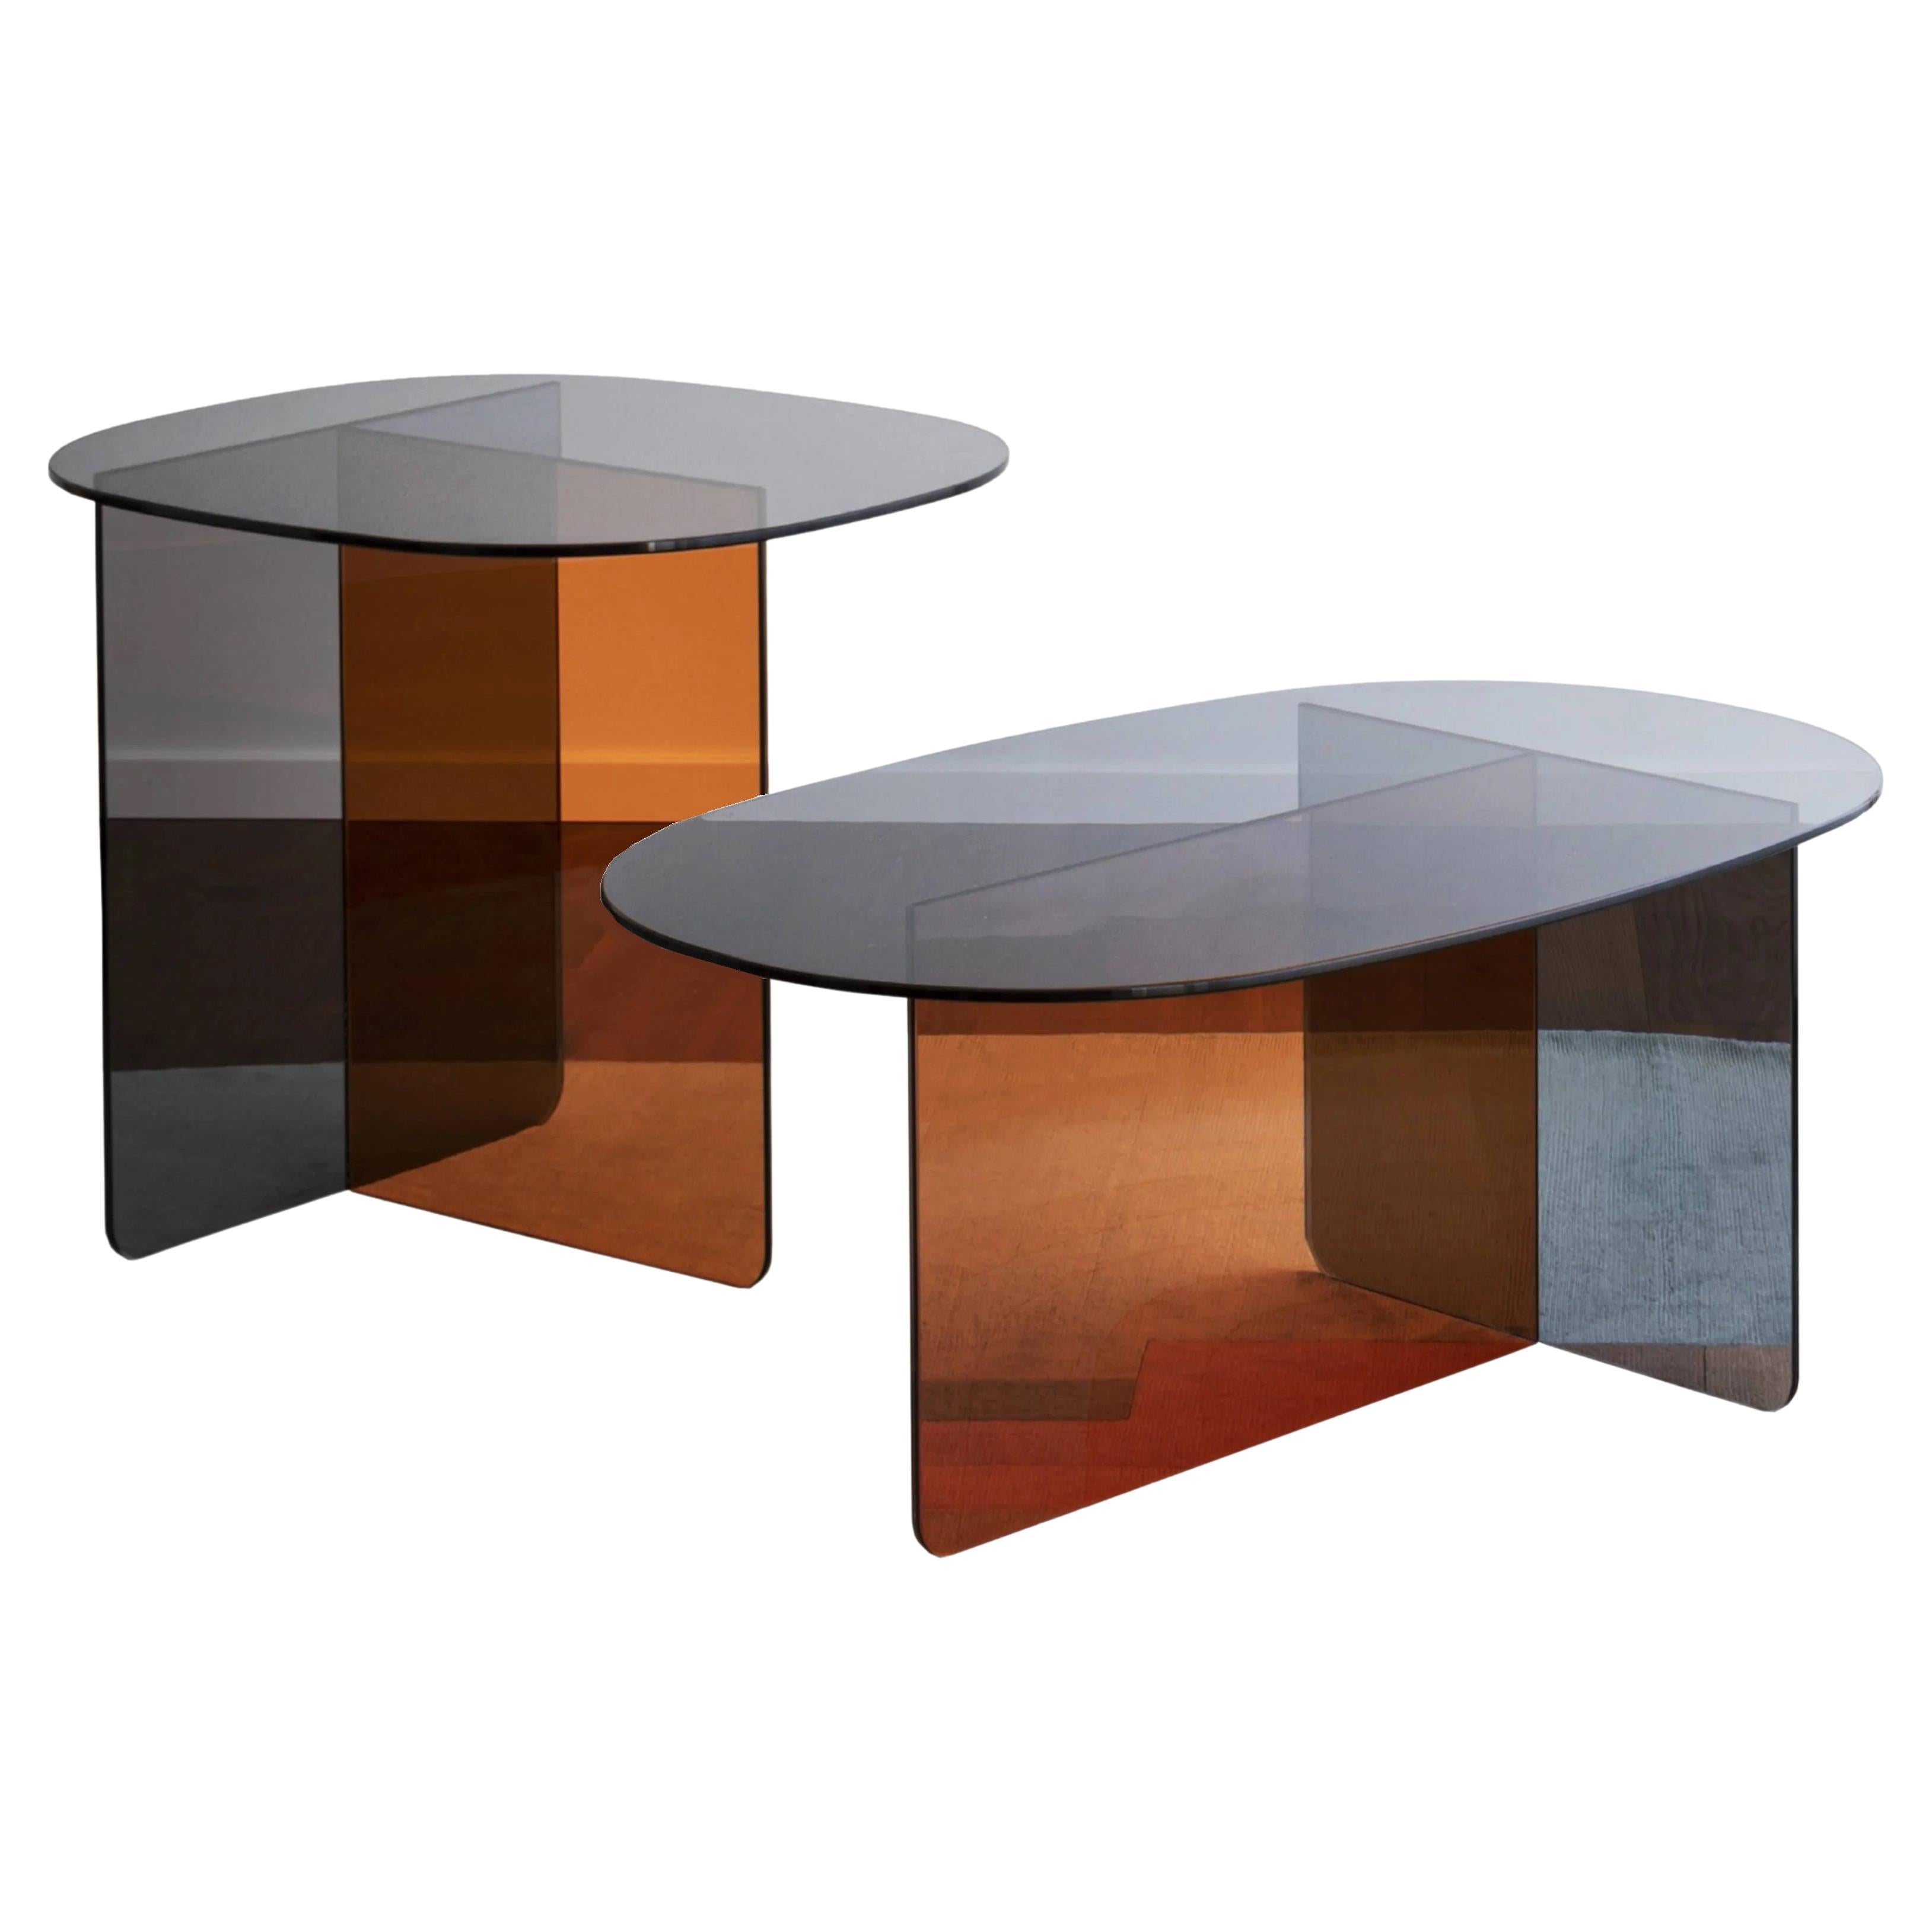 Set of 2 Geometric Low Tables in Colored Glass For Sale